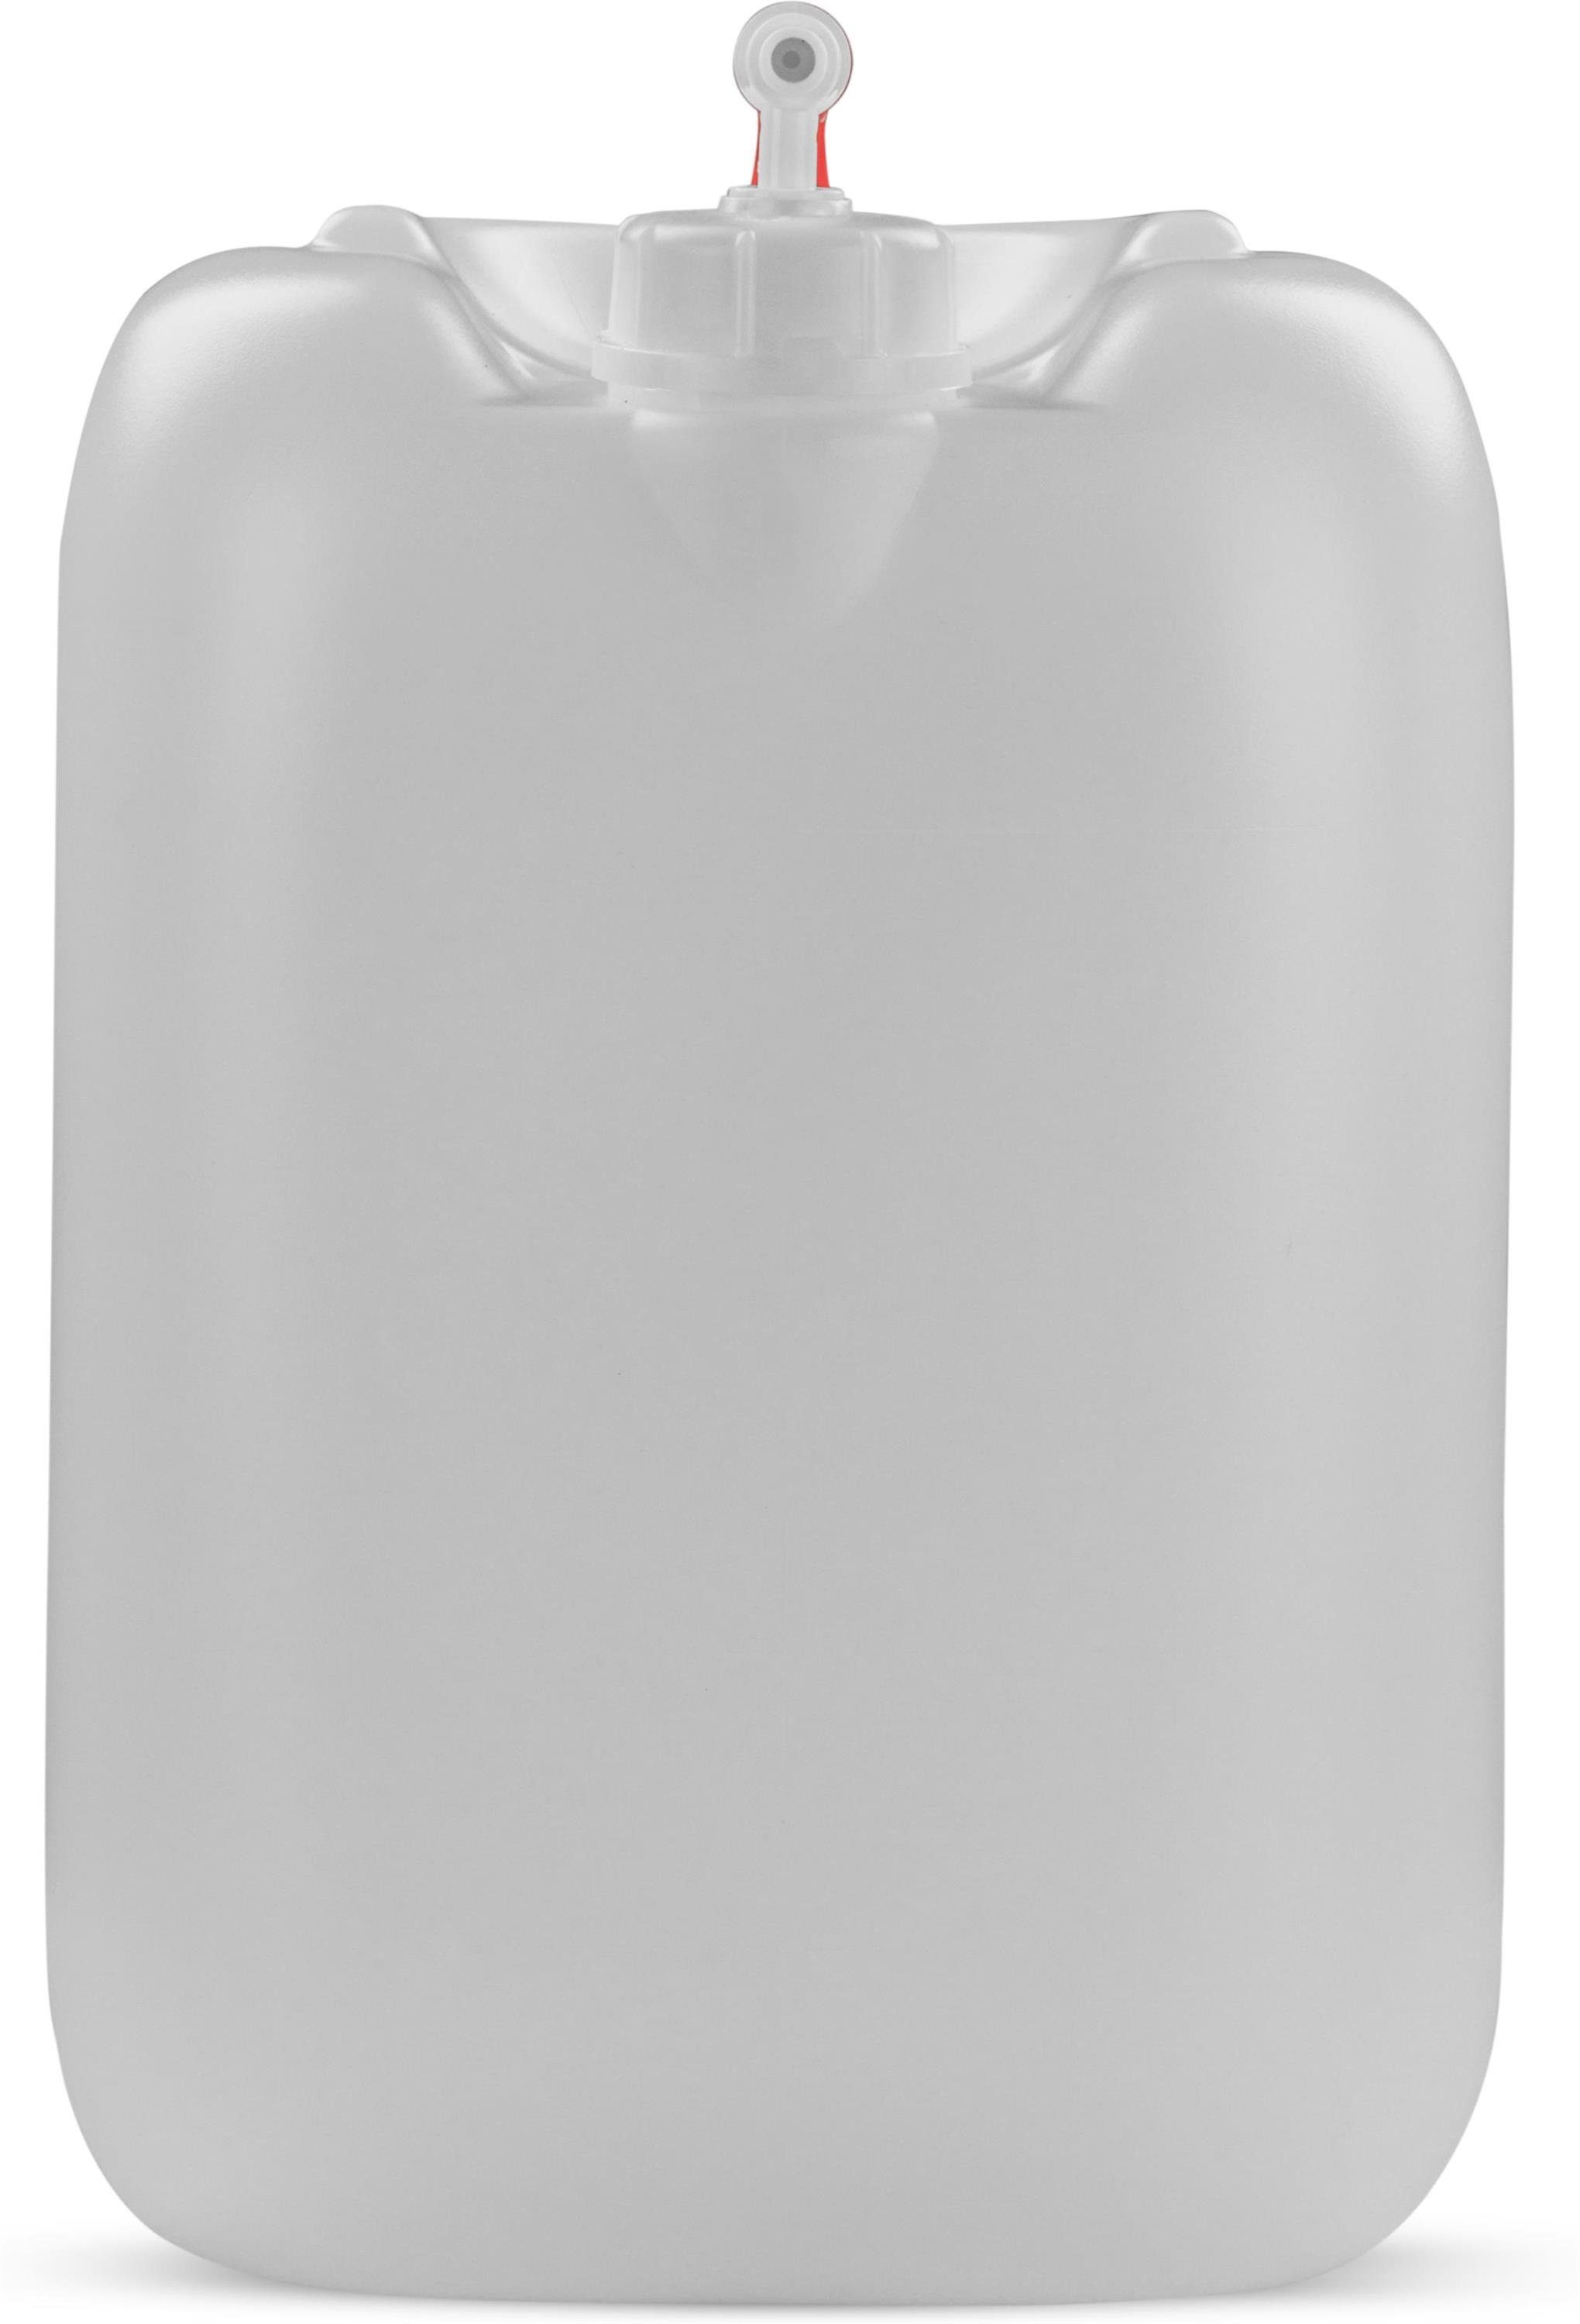 Campingkanister mit St), Carry Kanister Lebensmittelecht Wasserkanister (1 Liter Trinkwasserkanister 30 Hahn Wasserbehälter Outdoorkanister normani